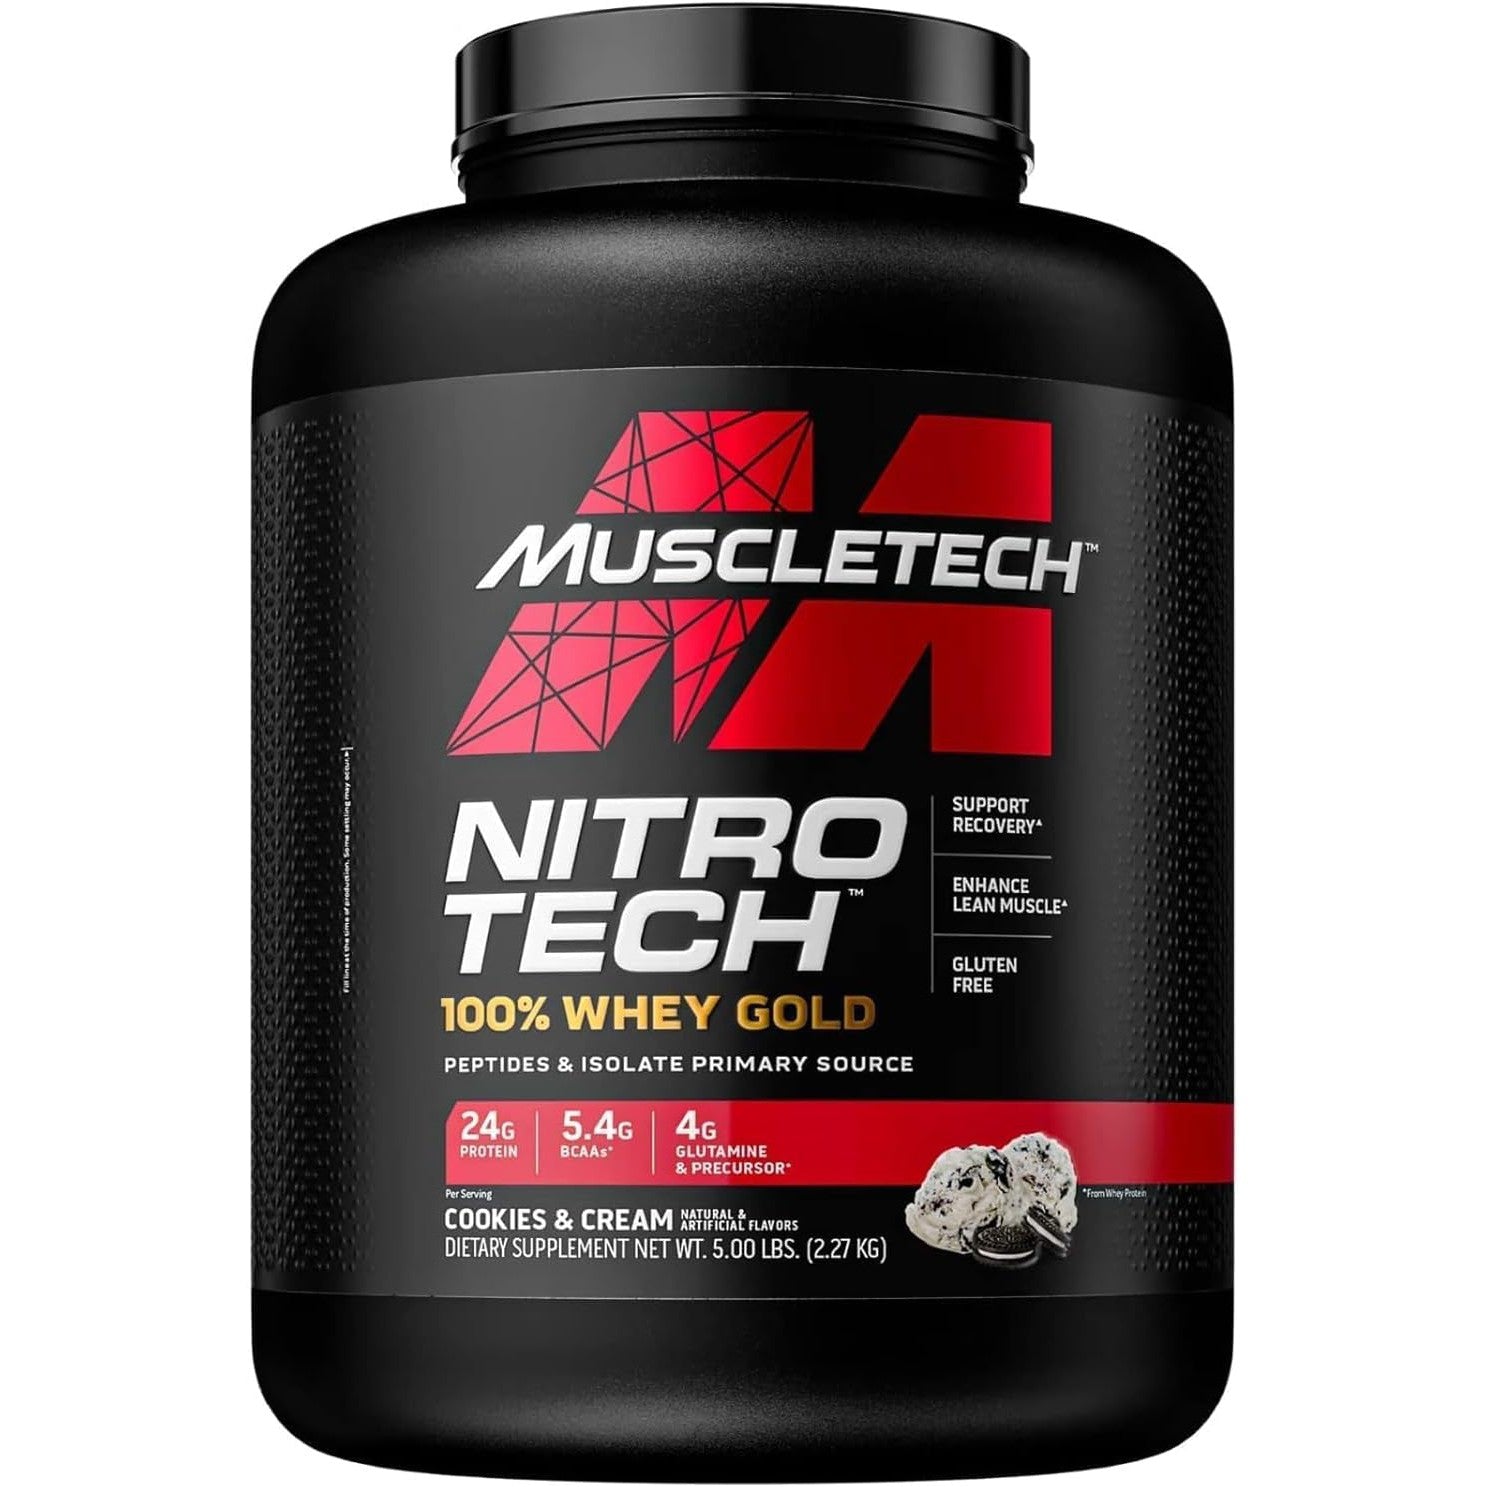 MuscleTech Nitro-Tech 100% Whey Gold | Isolate, Concentrate & Peptides | Ultra-Pure Whey Formula for Lean Muscle Cookies & Cream 2.27 KG